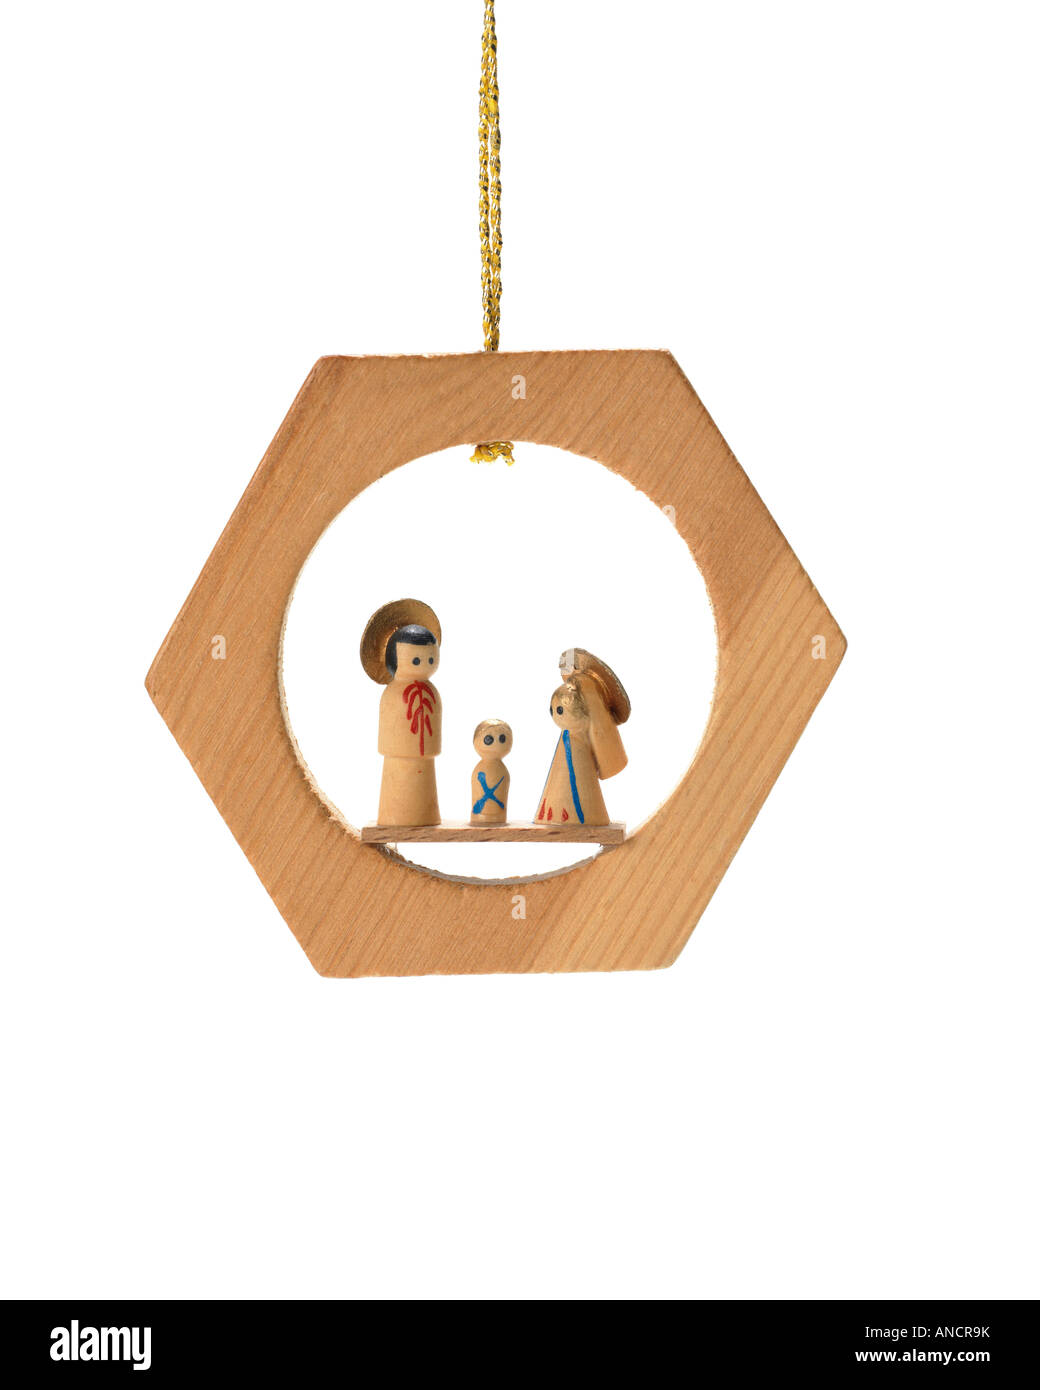 Christmas ornament nativity creche hanging on string Stock Photo